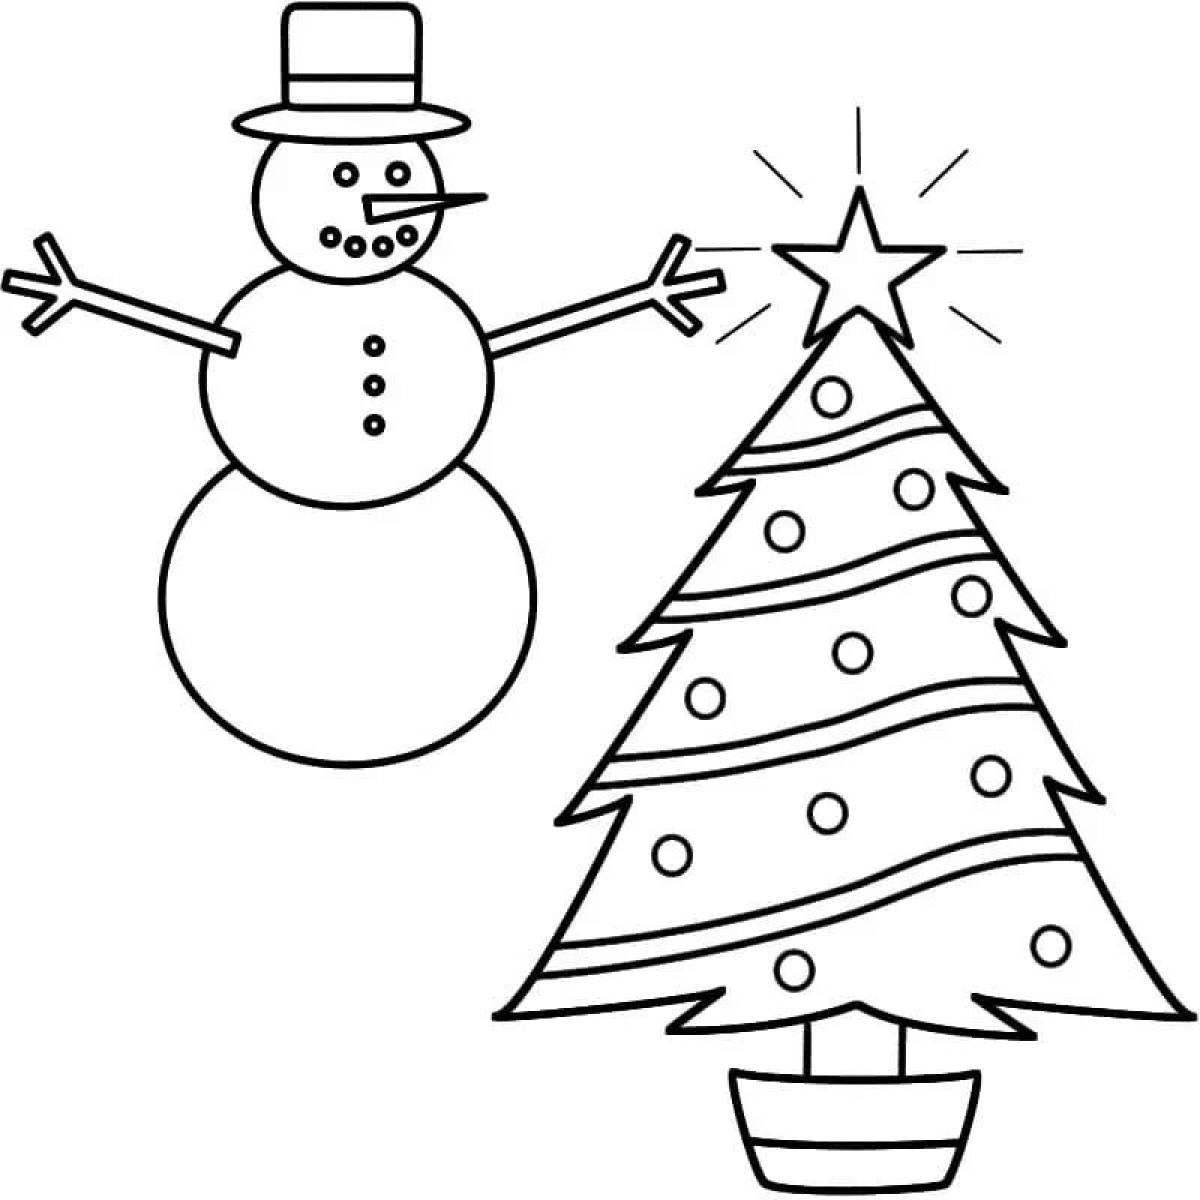 Tree and snowman #4